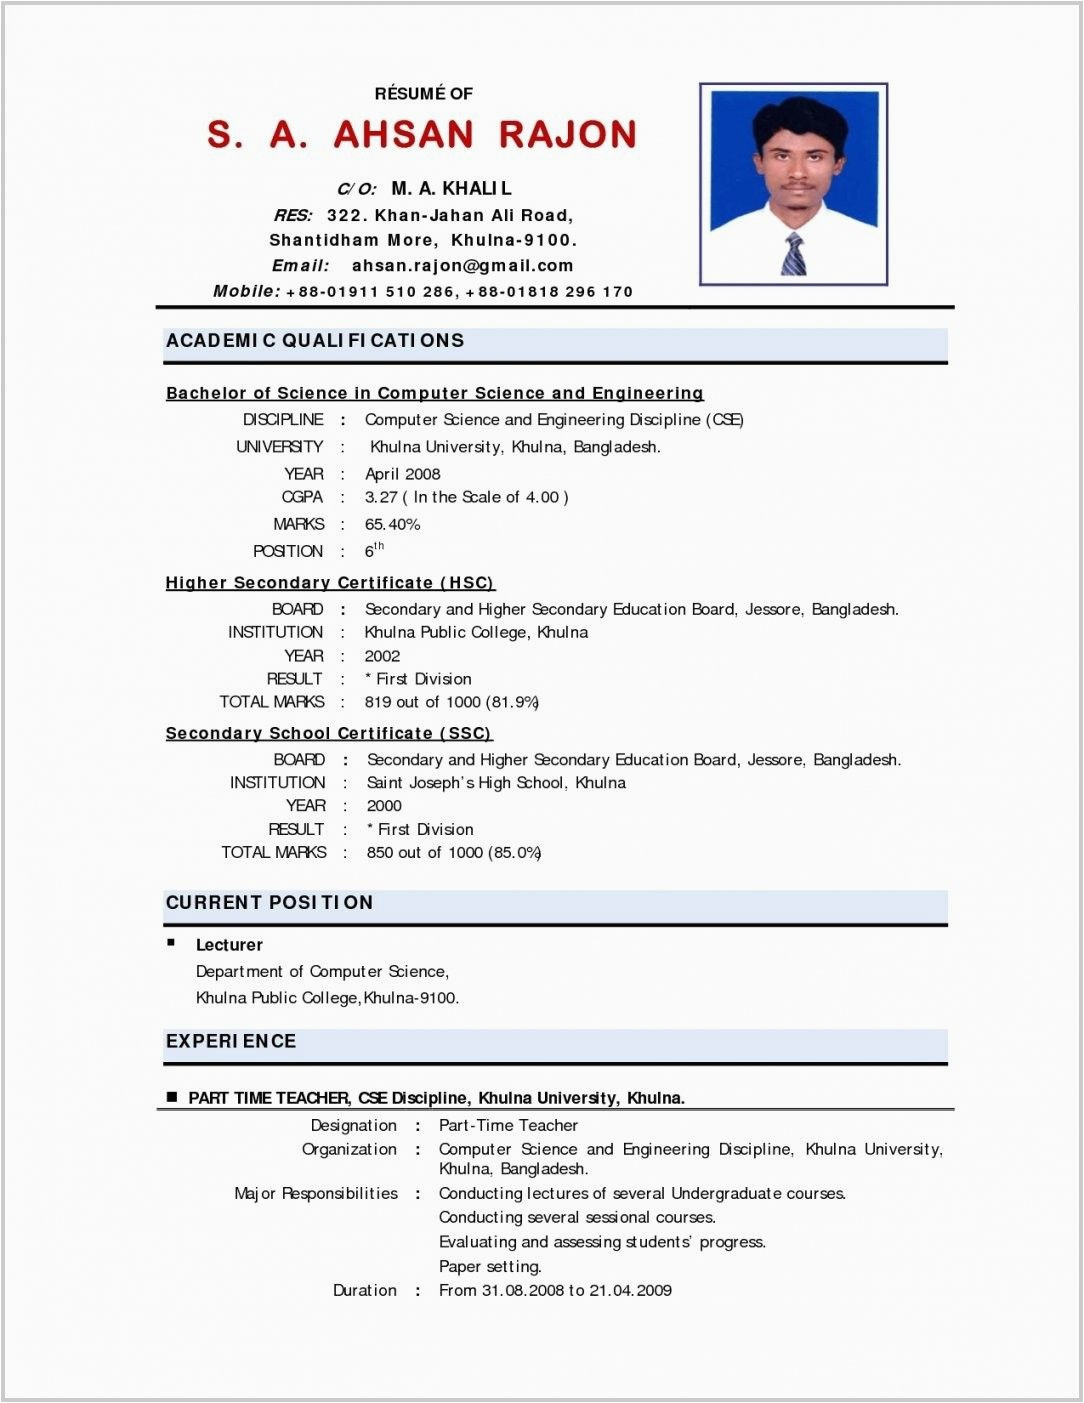 Resume Samples for College Students In India India